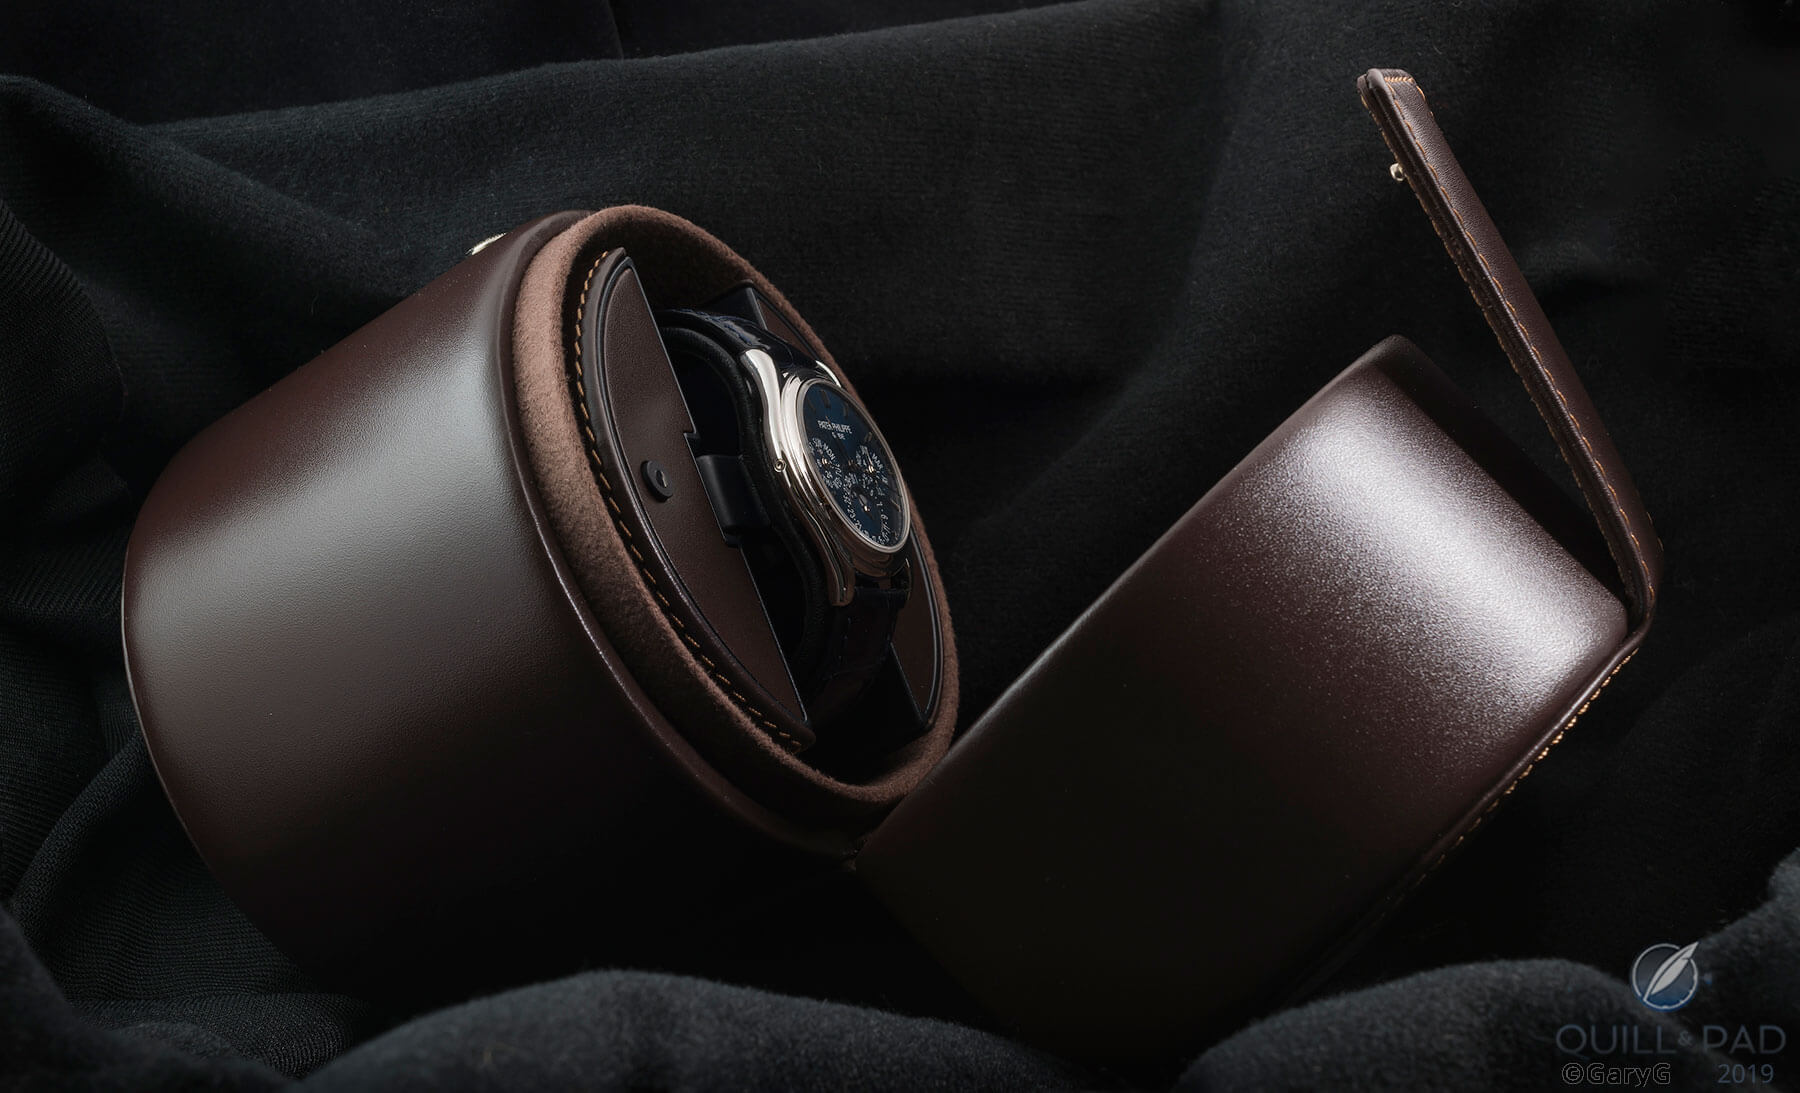 New-school style with class: Patek Philippe’s new cylinder watch winder